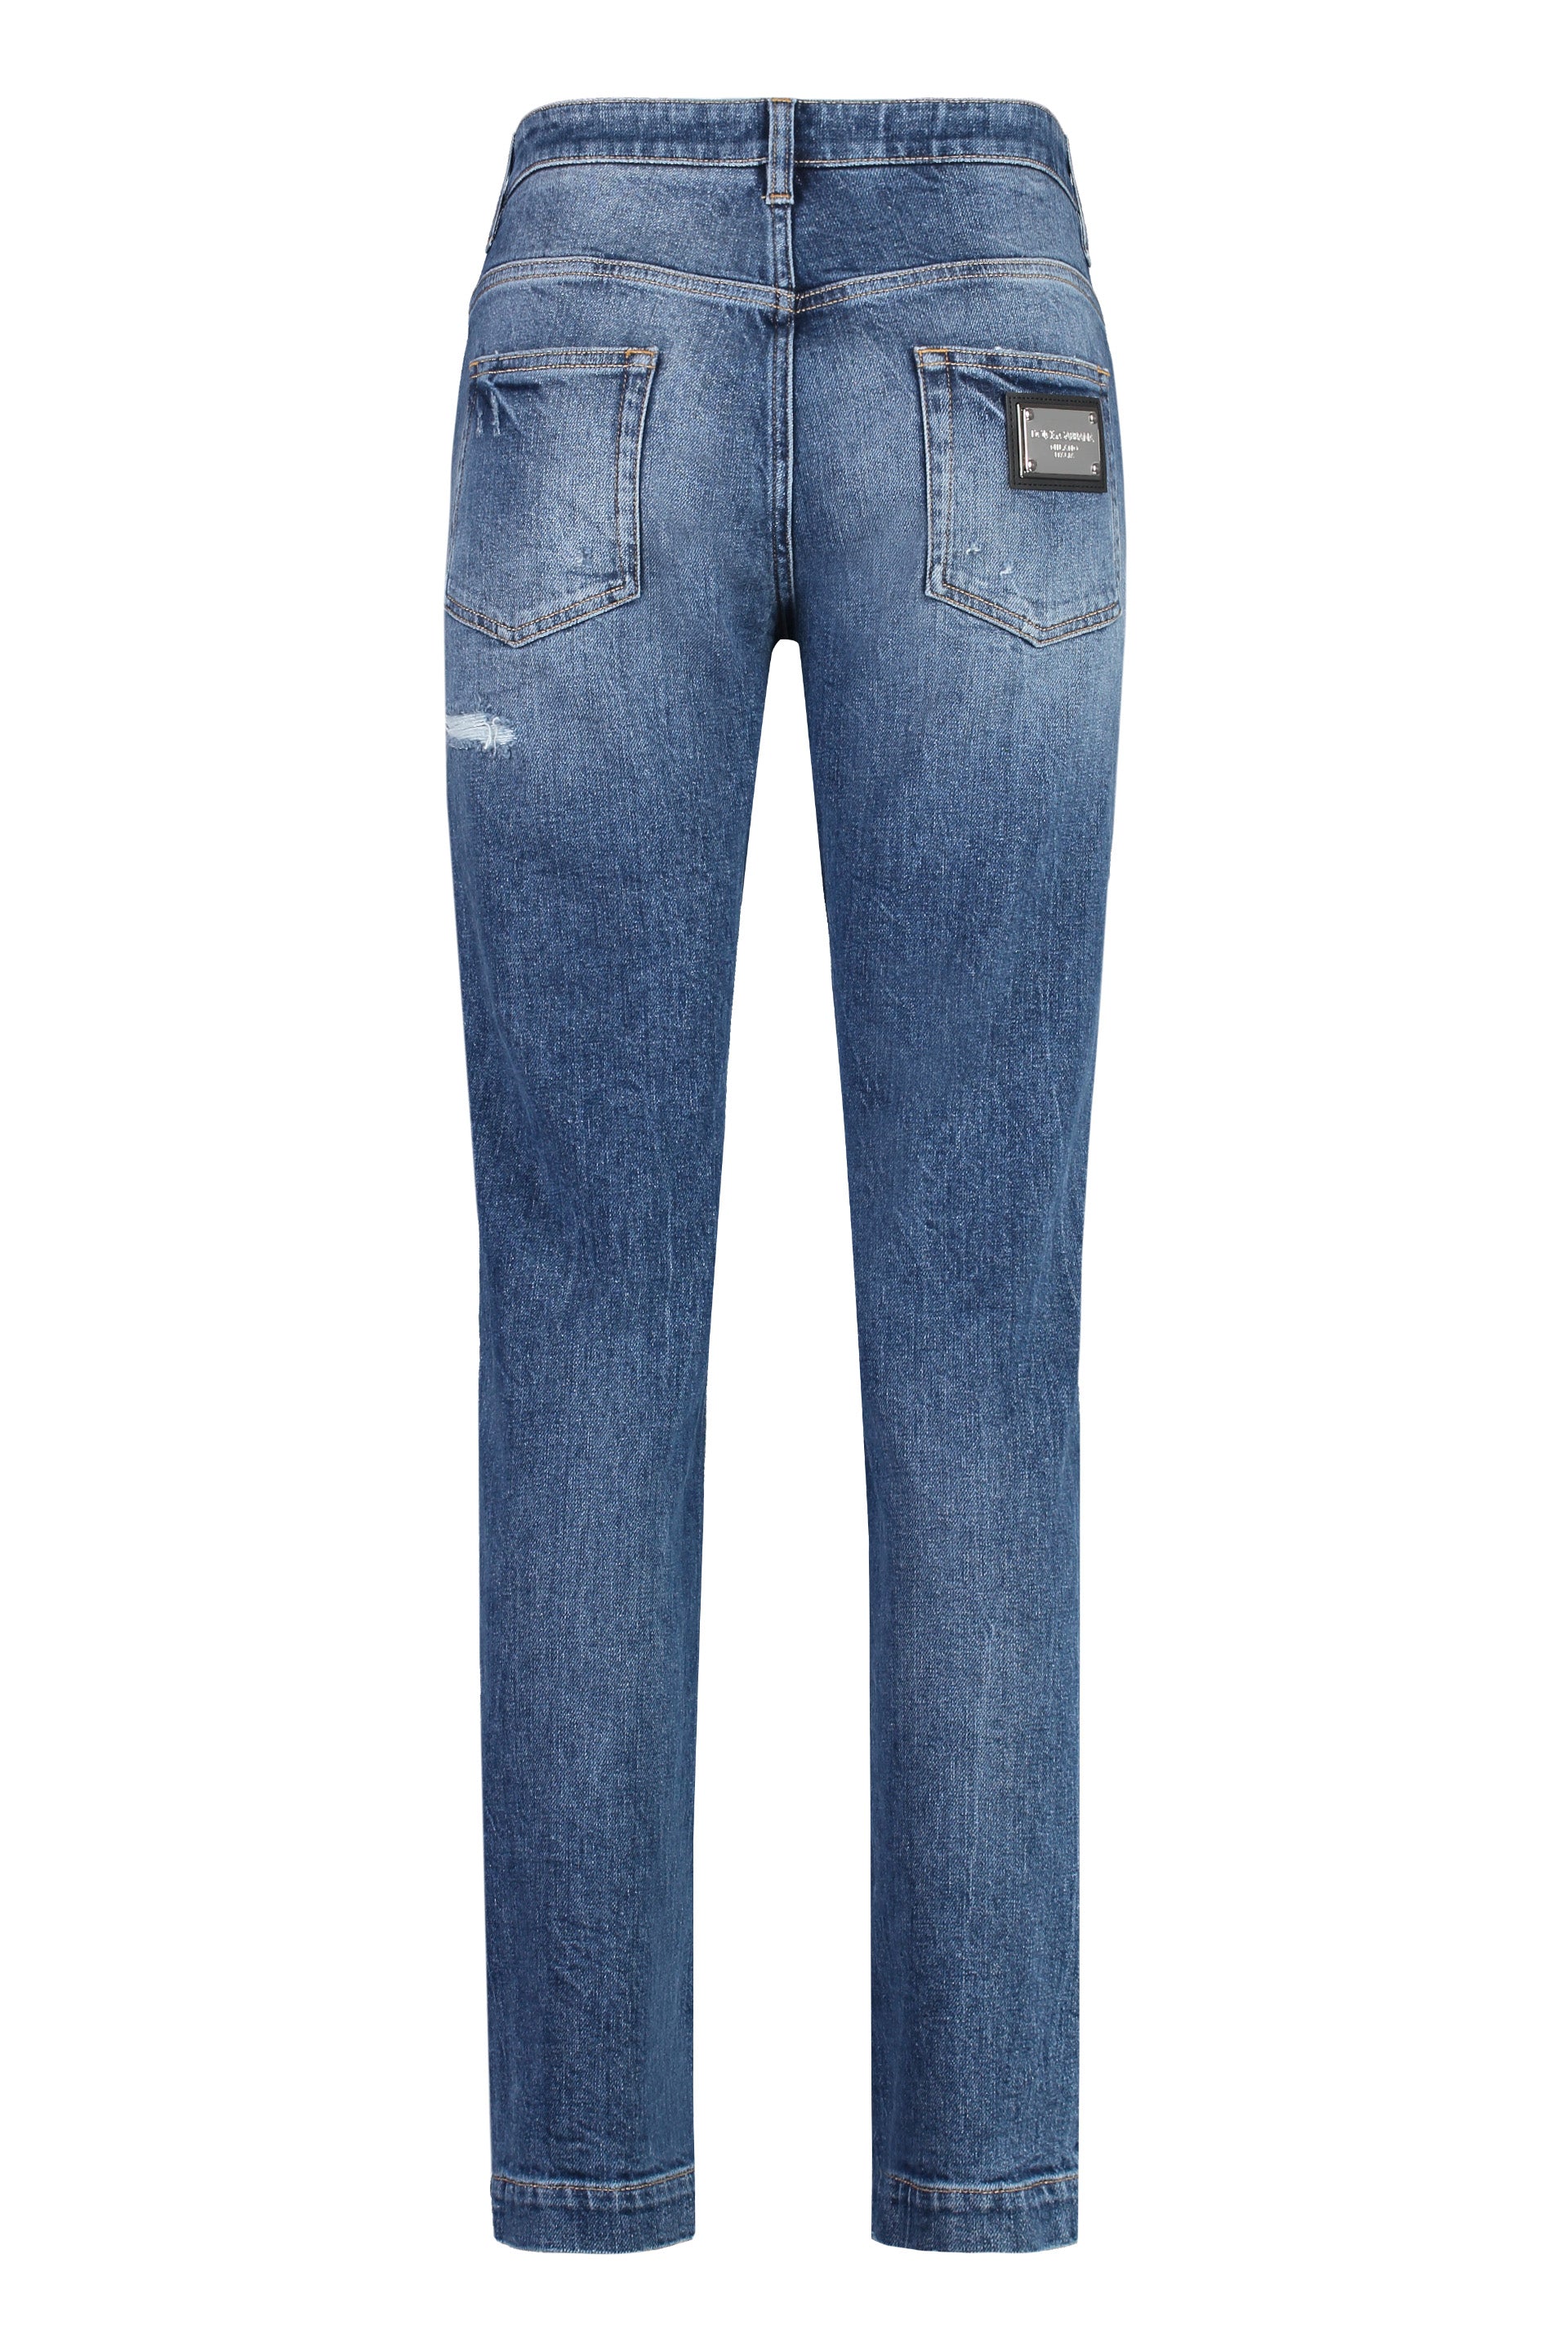 Shop Dolce & Gabbana Stretchy Denim Jeans For Women With Distressed Details And Metal Rivets And Buttons